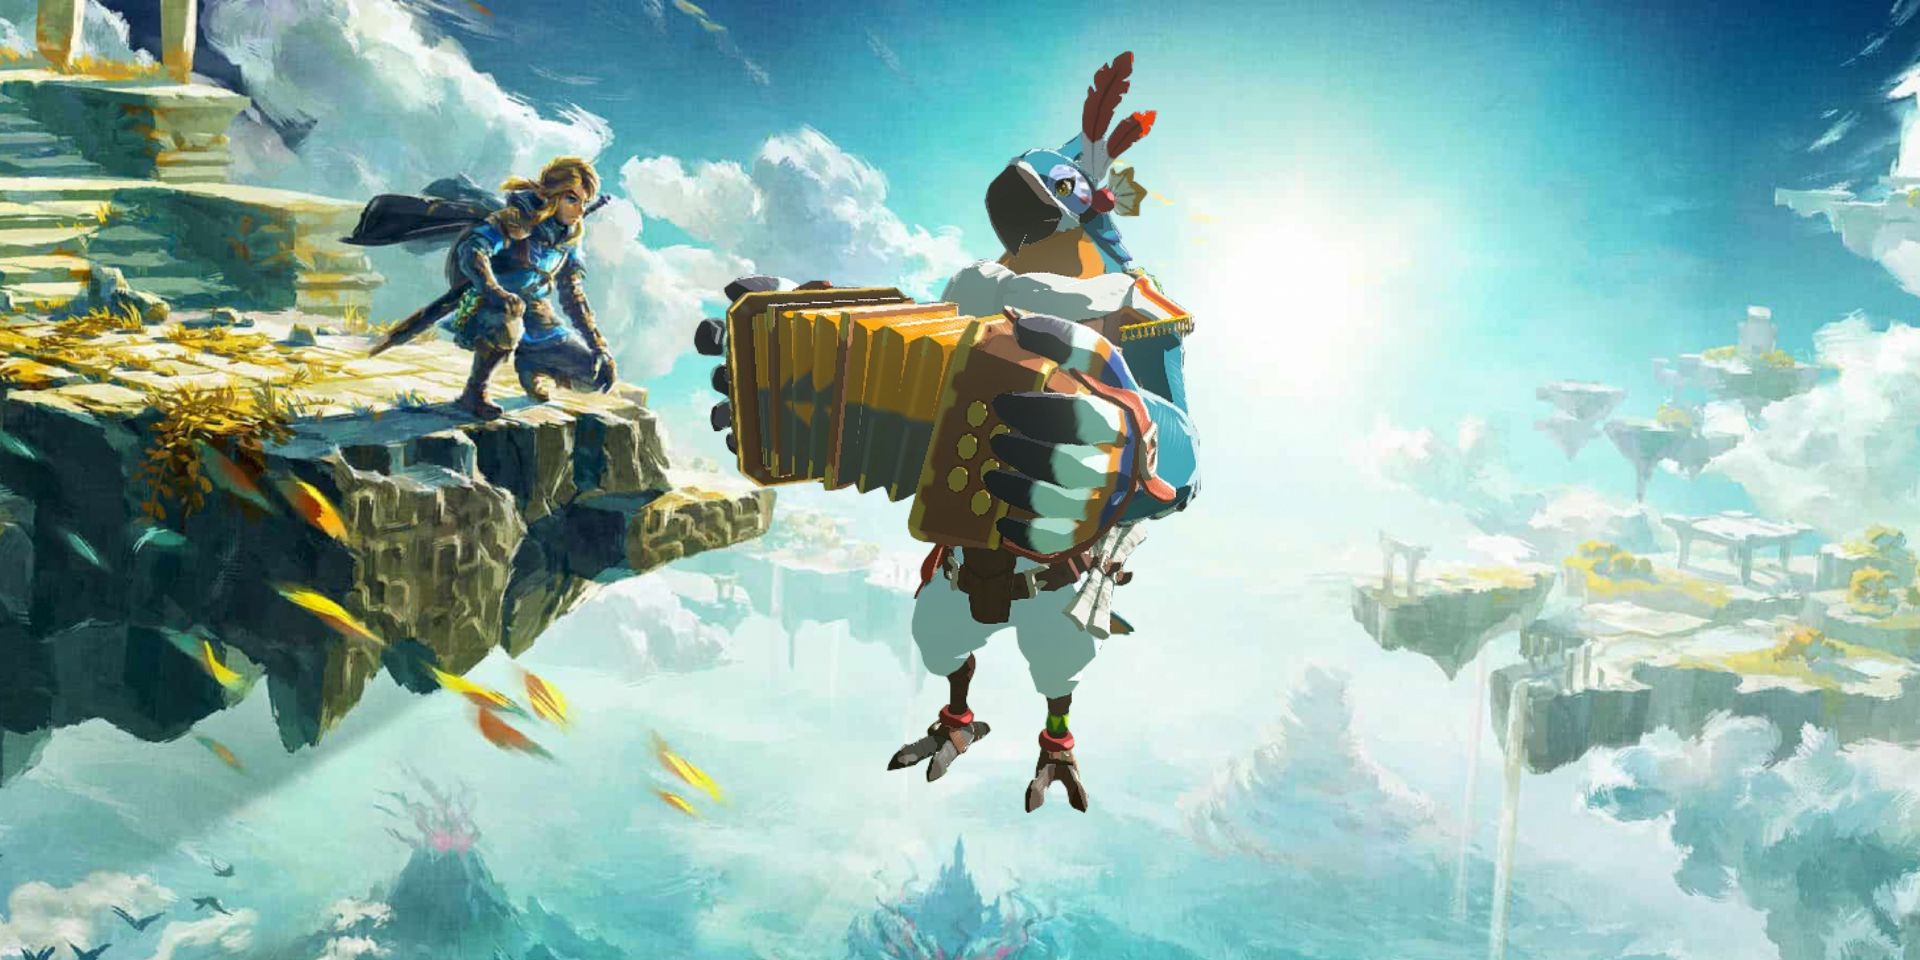 The signature art for The Legend of Zelda: Tears of the Kingdom, with Breath of the Wild NPC Kass superimposed.